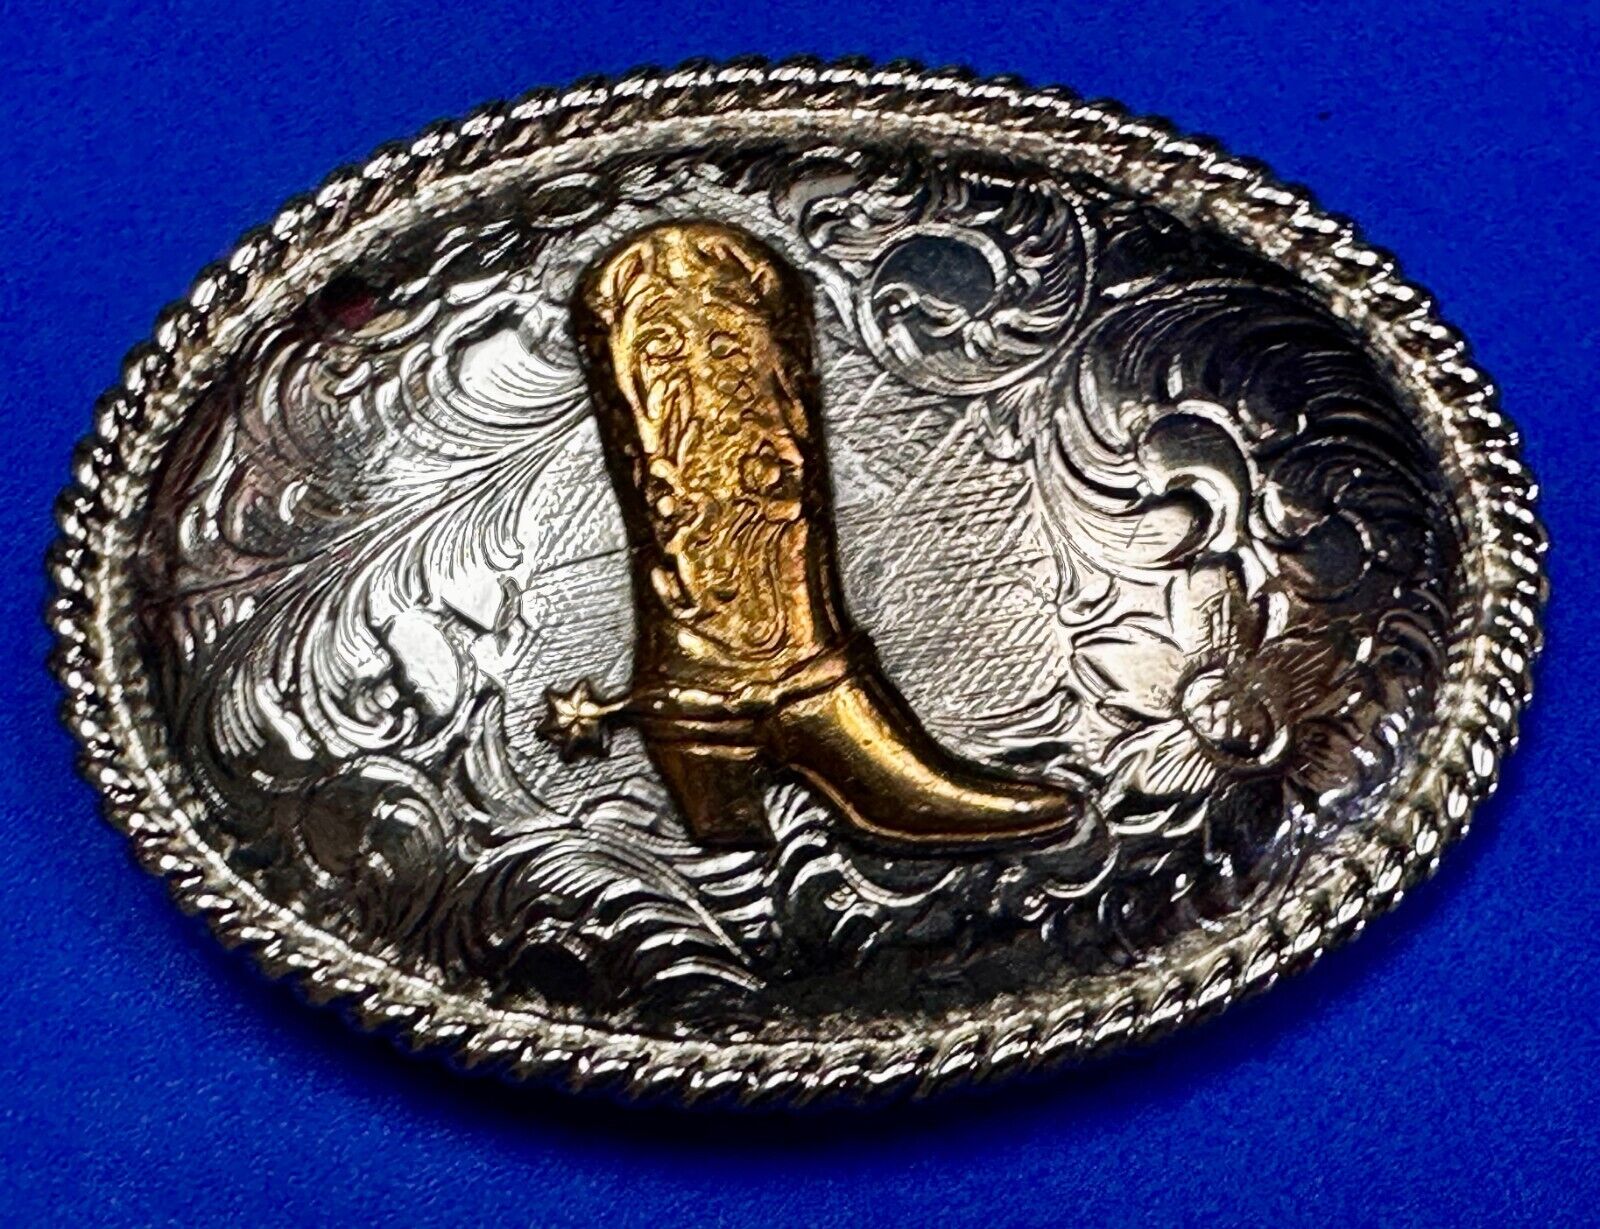 Cowboy Cowgirl Boots - Vintage Western Two Toned Belt Buckle - Alpaca Mexico